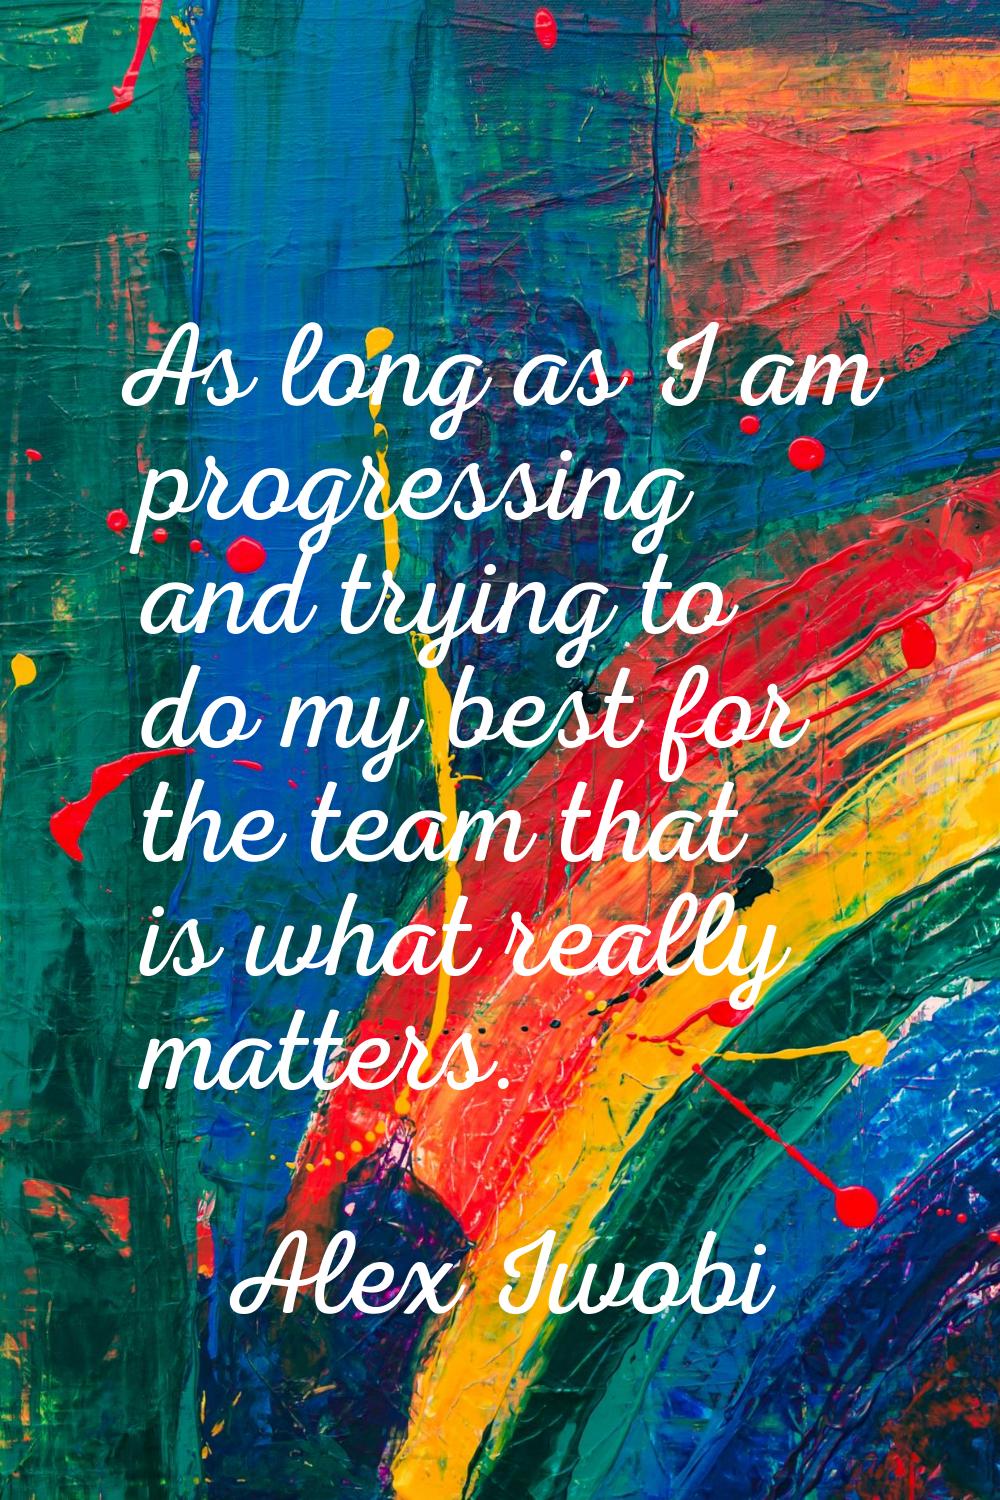 As long as I am progressing and trying to do my best for the team that is what really matters.